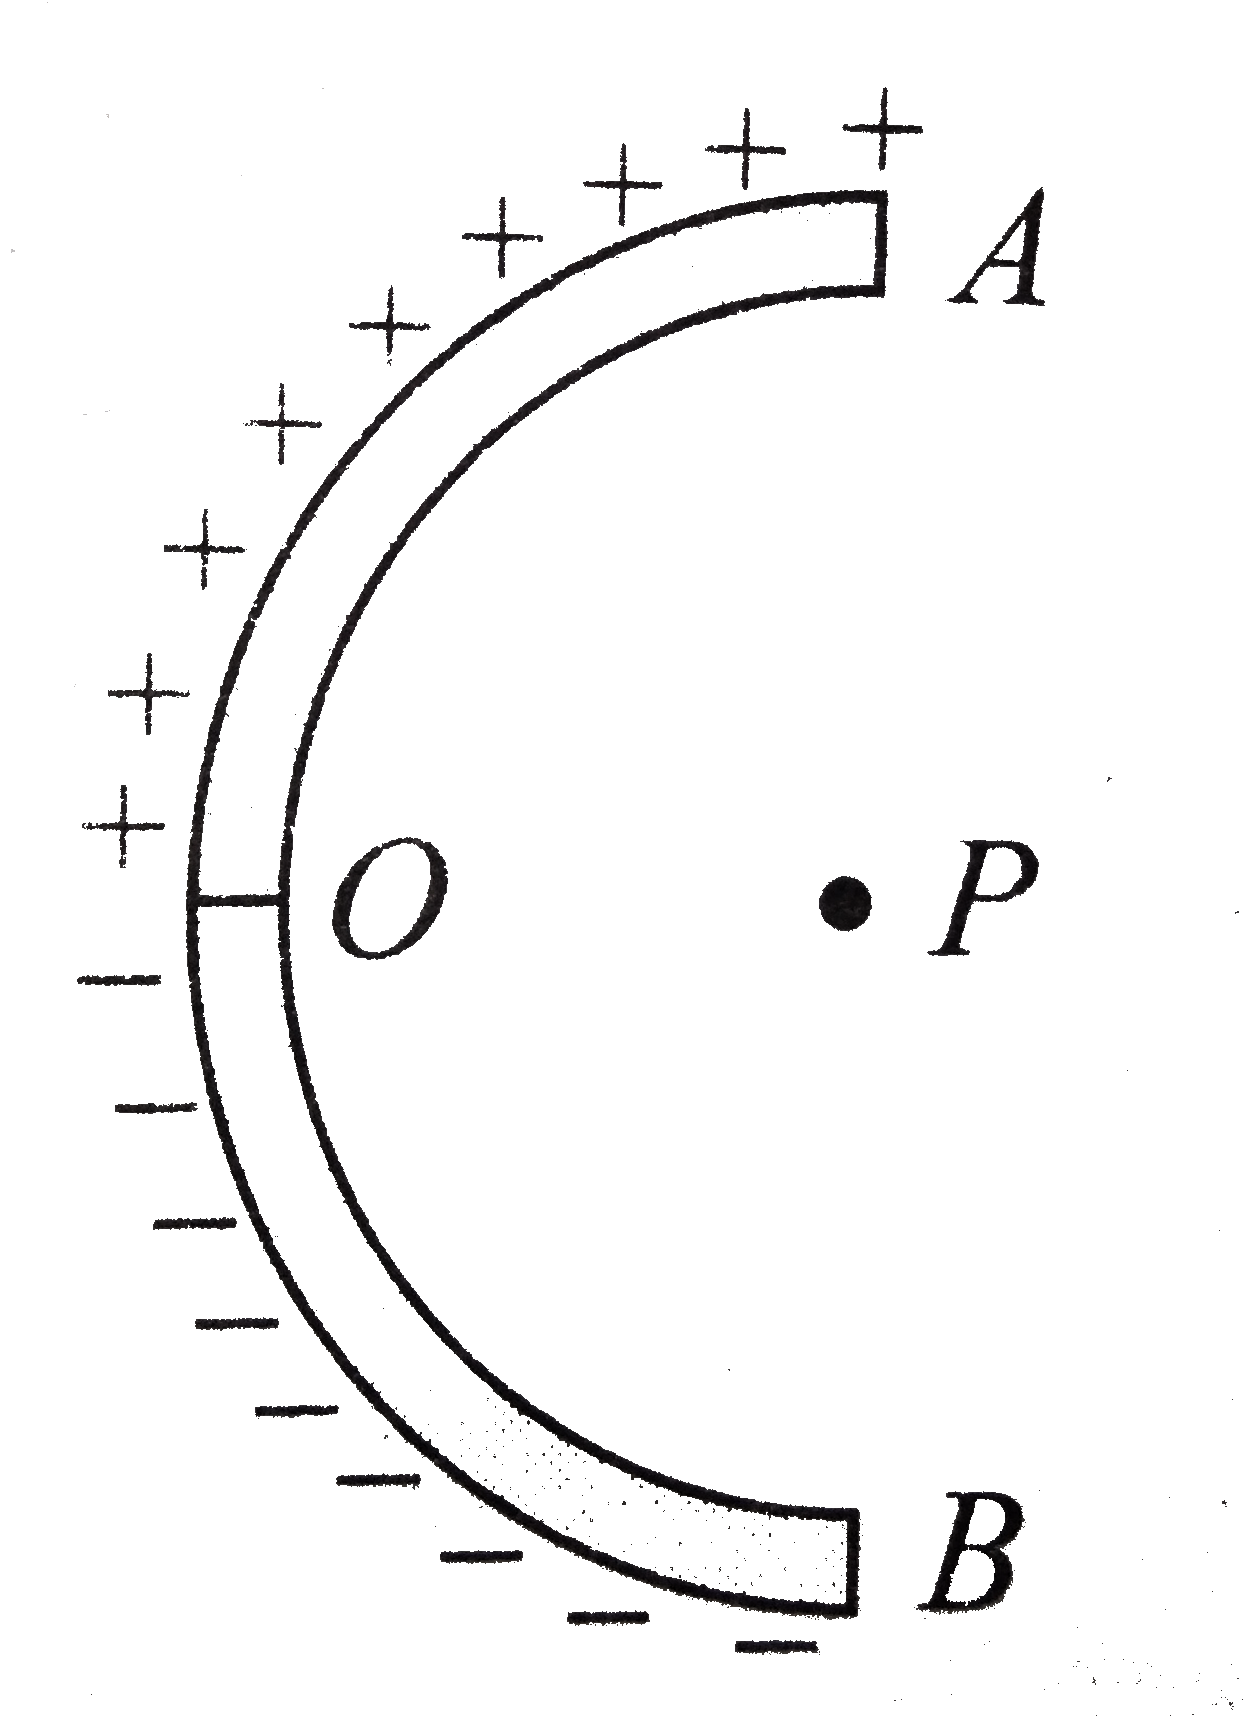 A thin glass rod is bent into a semicircle of radius r. A charge +Q is uniformly distributed along the upper half, and a charge -Q is uniformly distributed along the  lower half, as shown in fig. The electric field E at P, the center of the semicircle, is